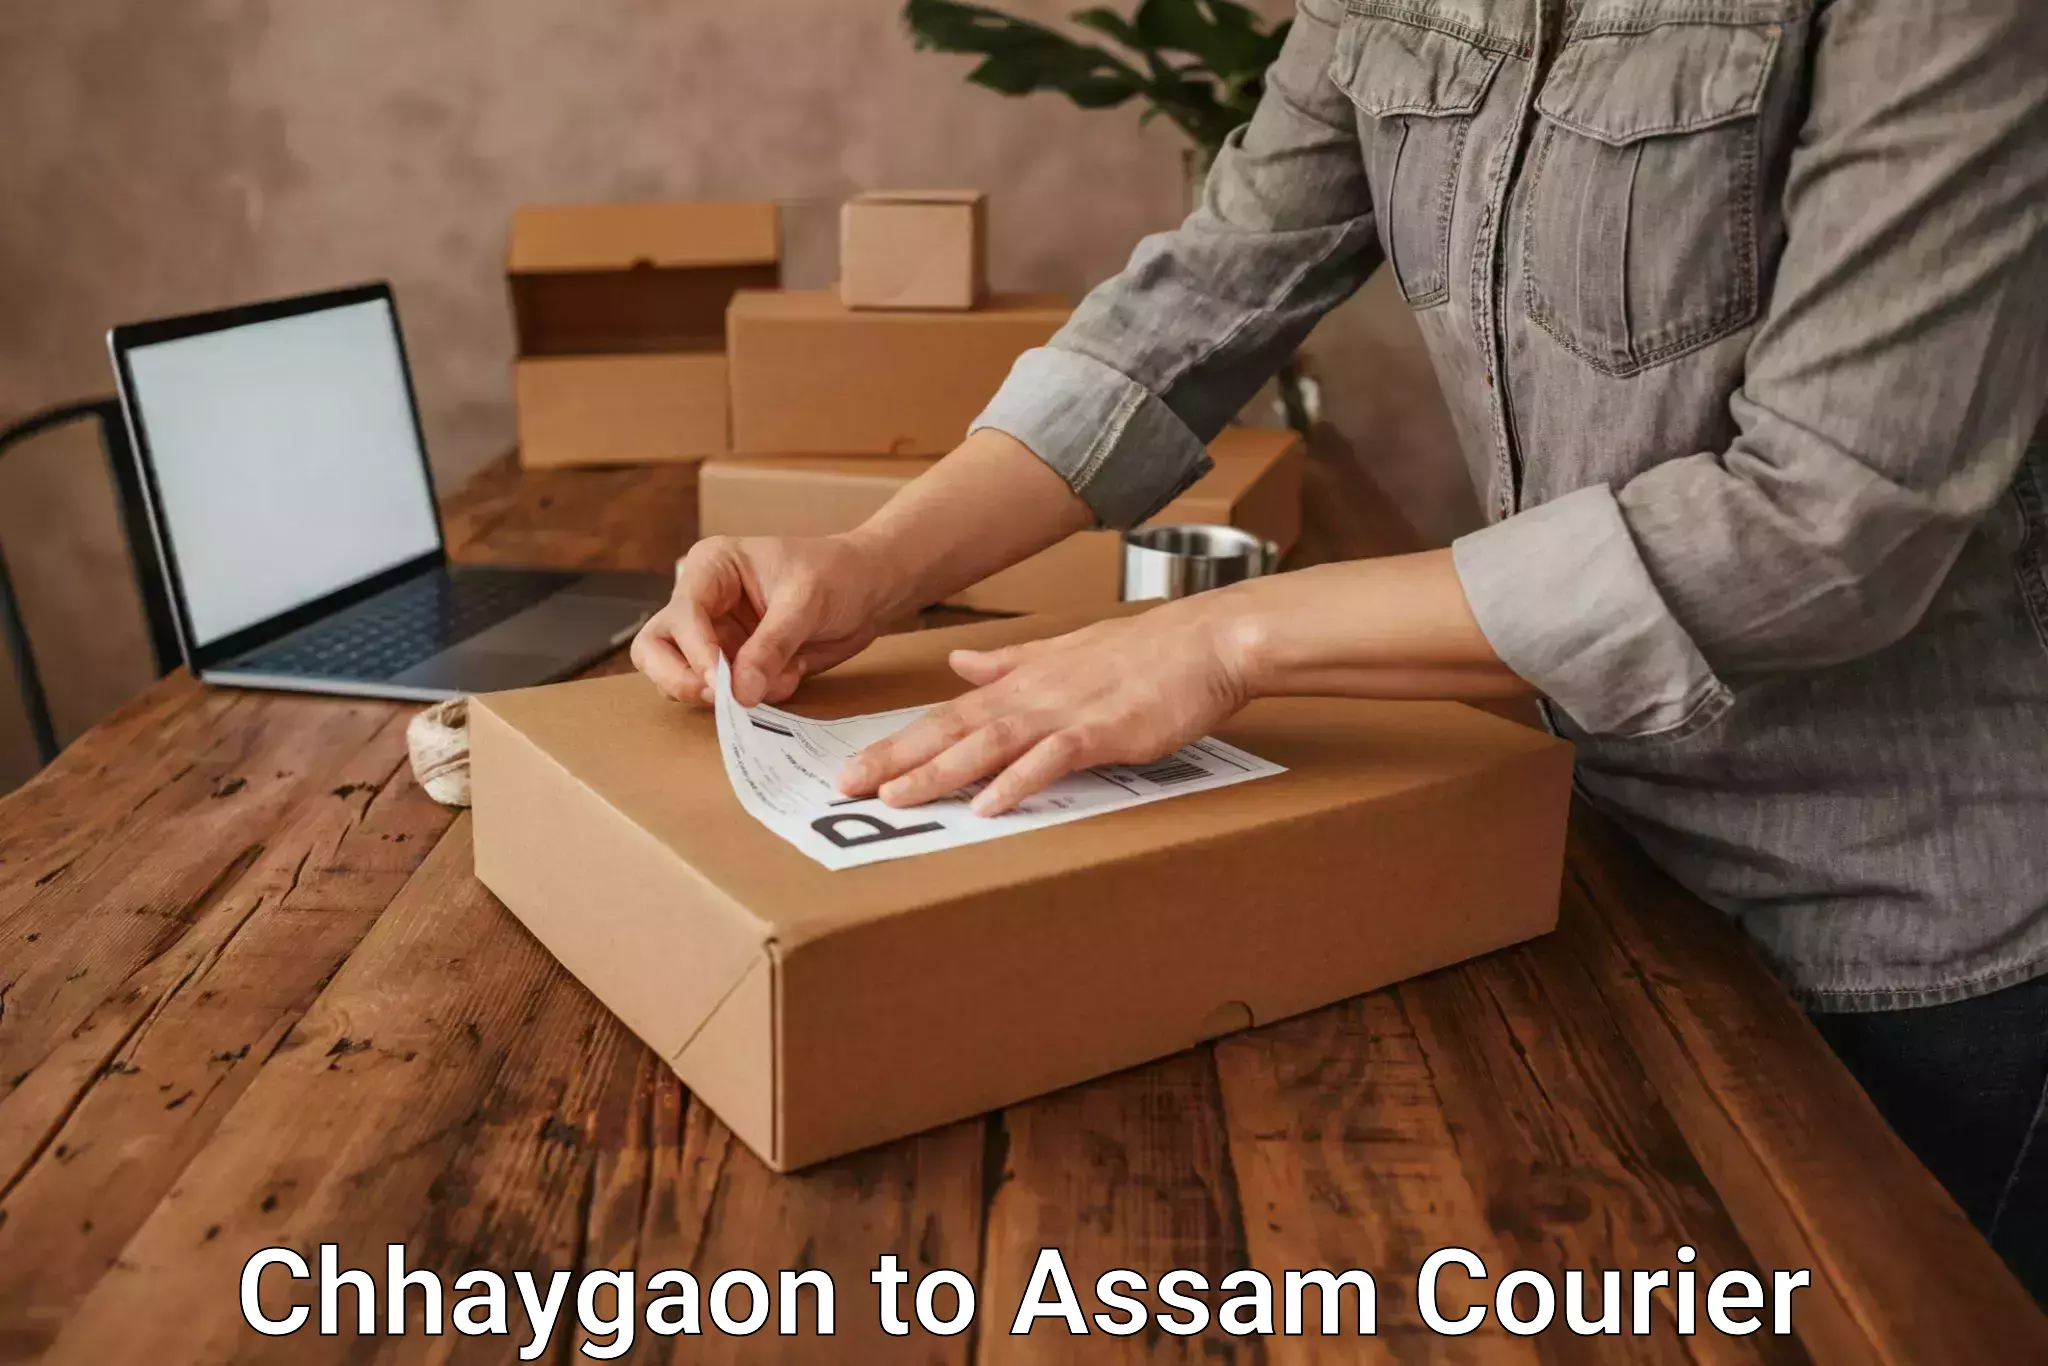 24-hour courier service Chhaygaon to Noonmati